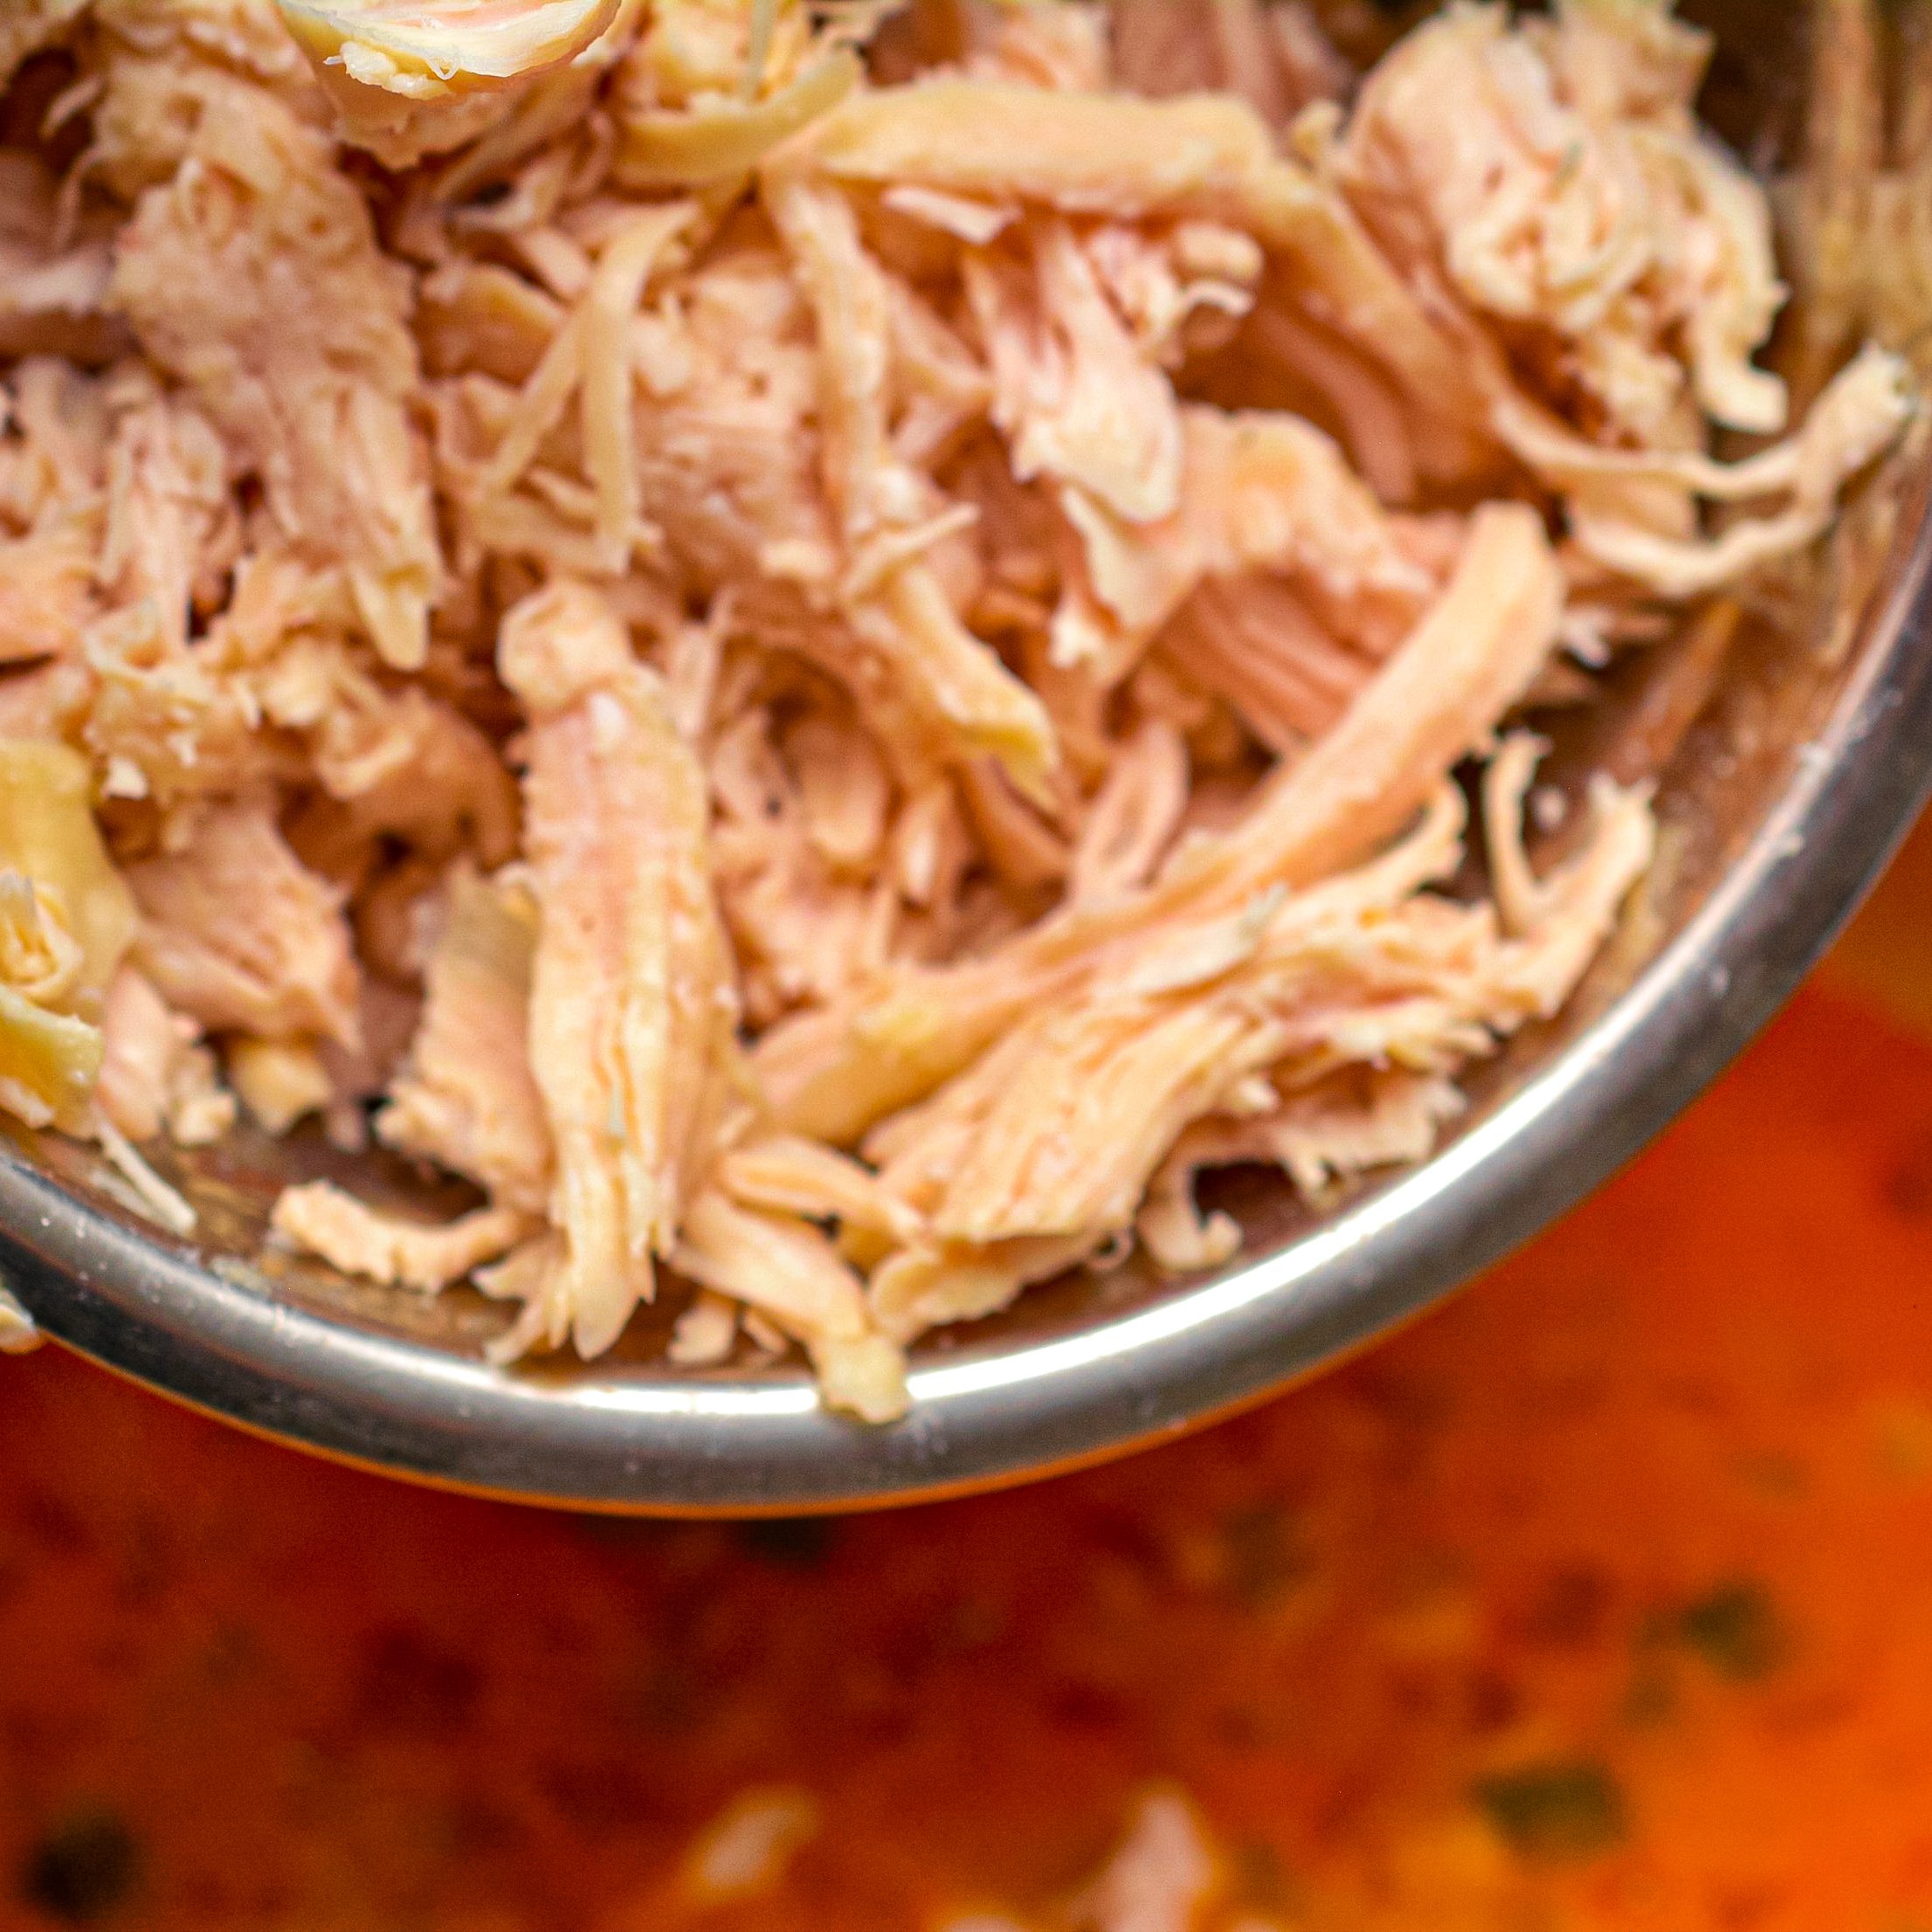 Mix in 1 pound of shredded chicken, and combine well.